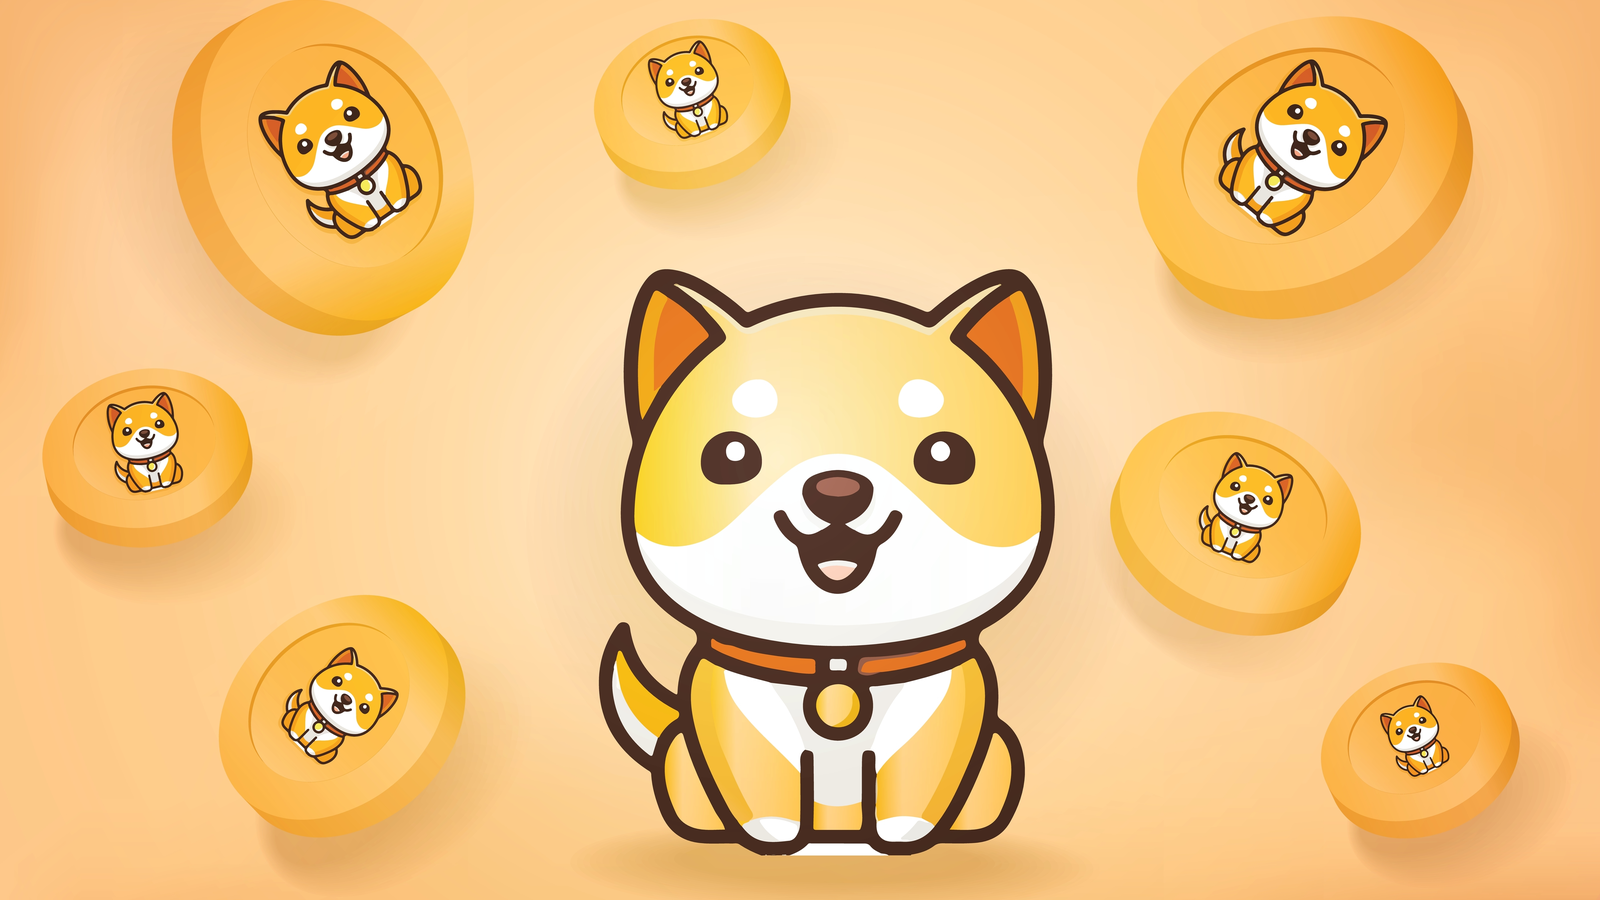 Graphic of Baby Doge Coin (Baby Doge Coin Price Predictions) mascot on sandy orange background